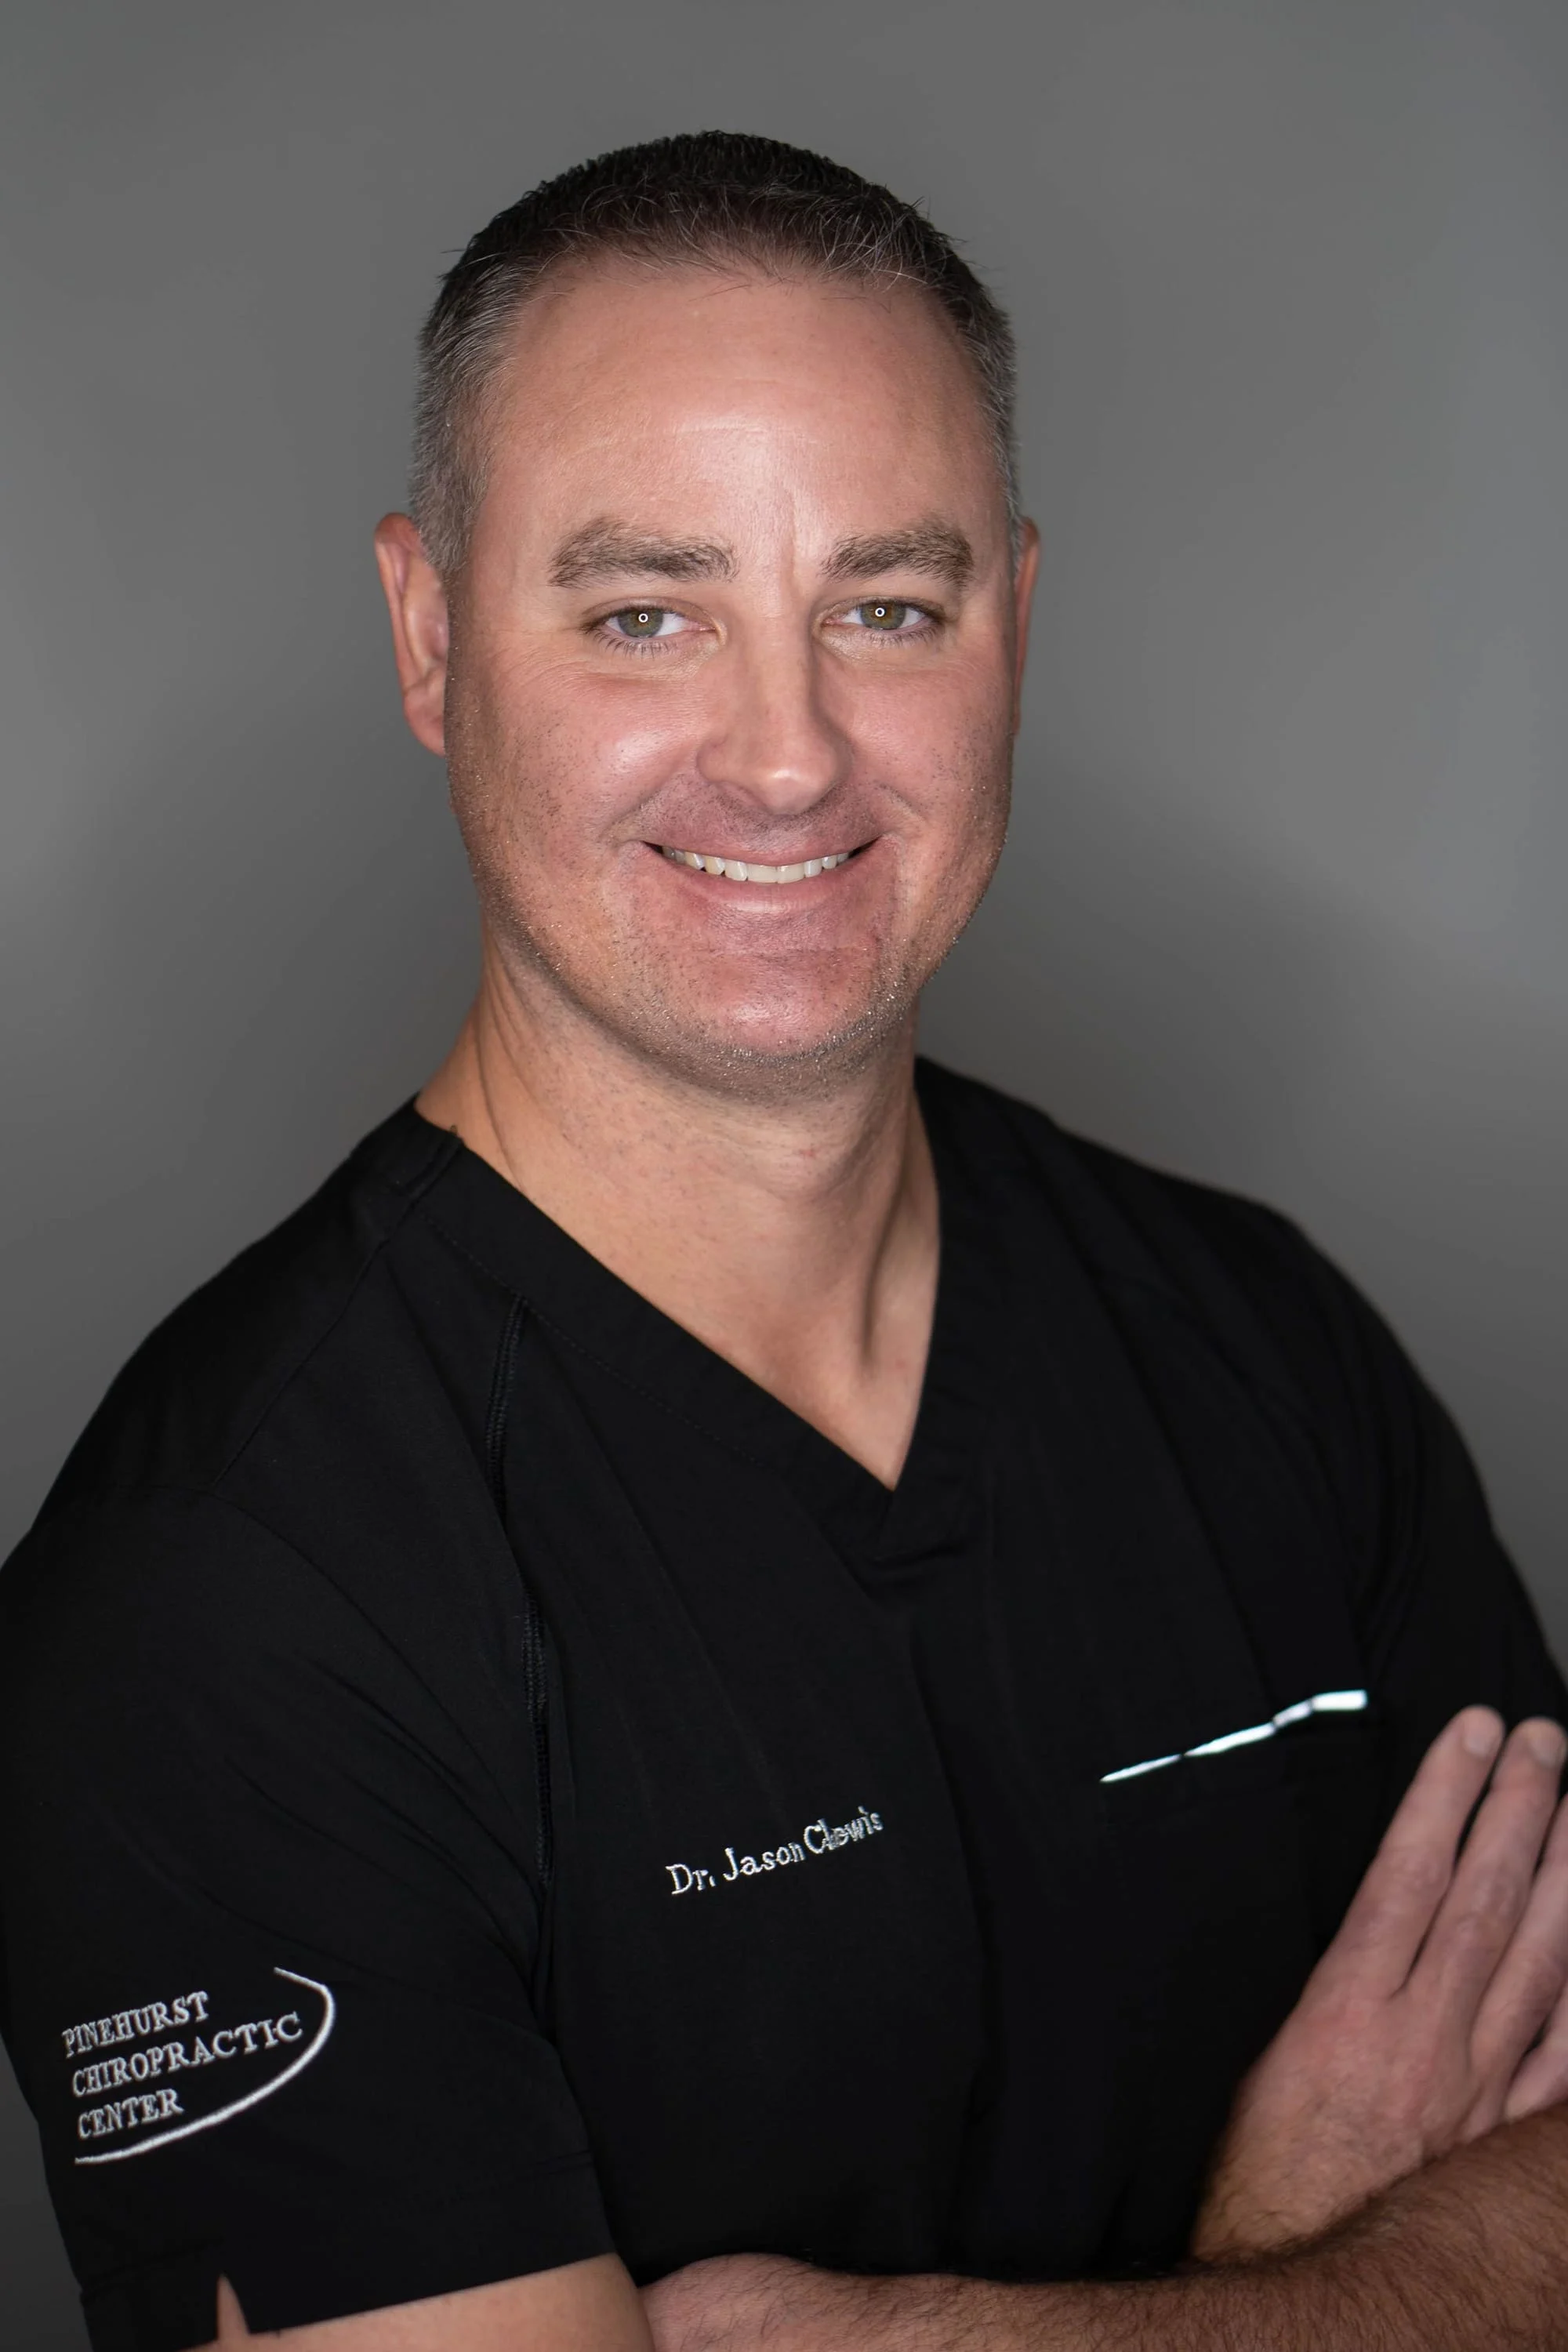 Dr. Jason Clewis